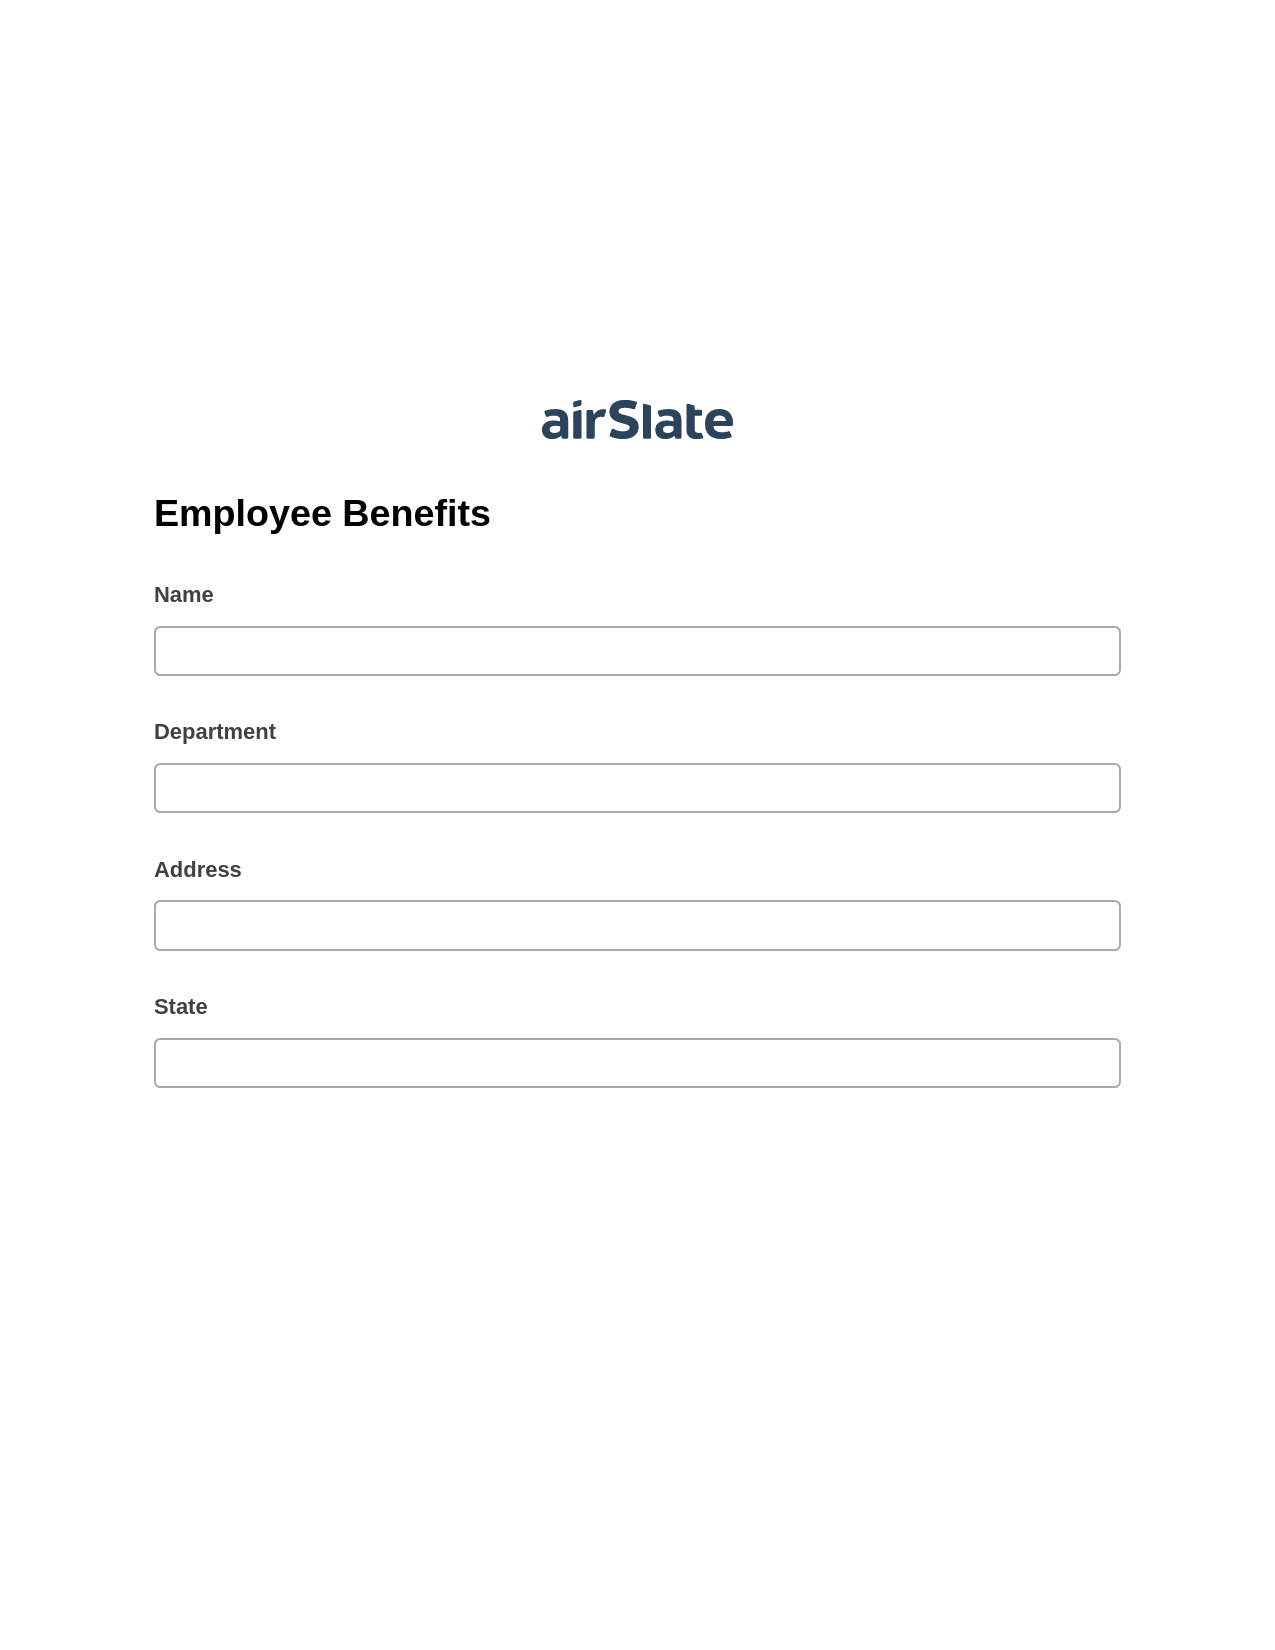 Employee Benefits Pre-fill Document Bot, Create QuickBooks invoice Bot, Archive to SharePoint Folder Bot